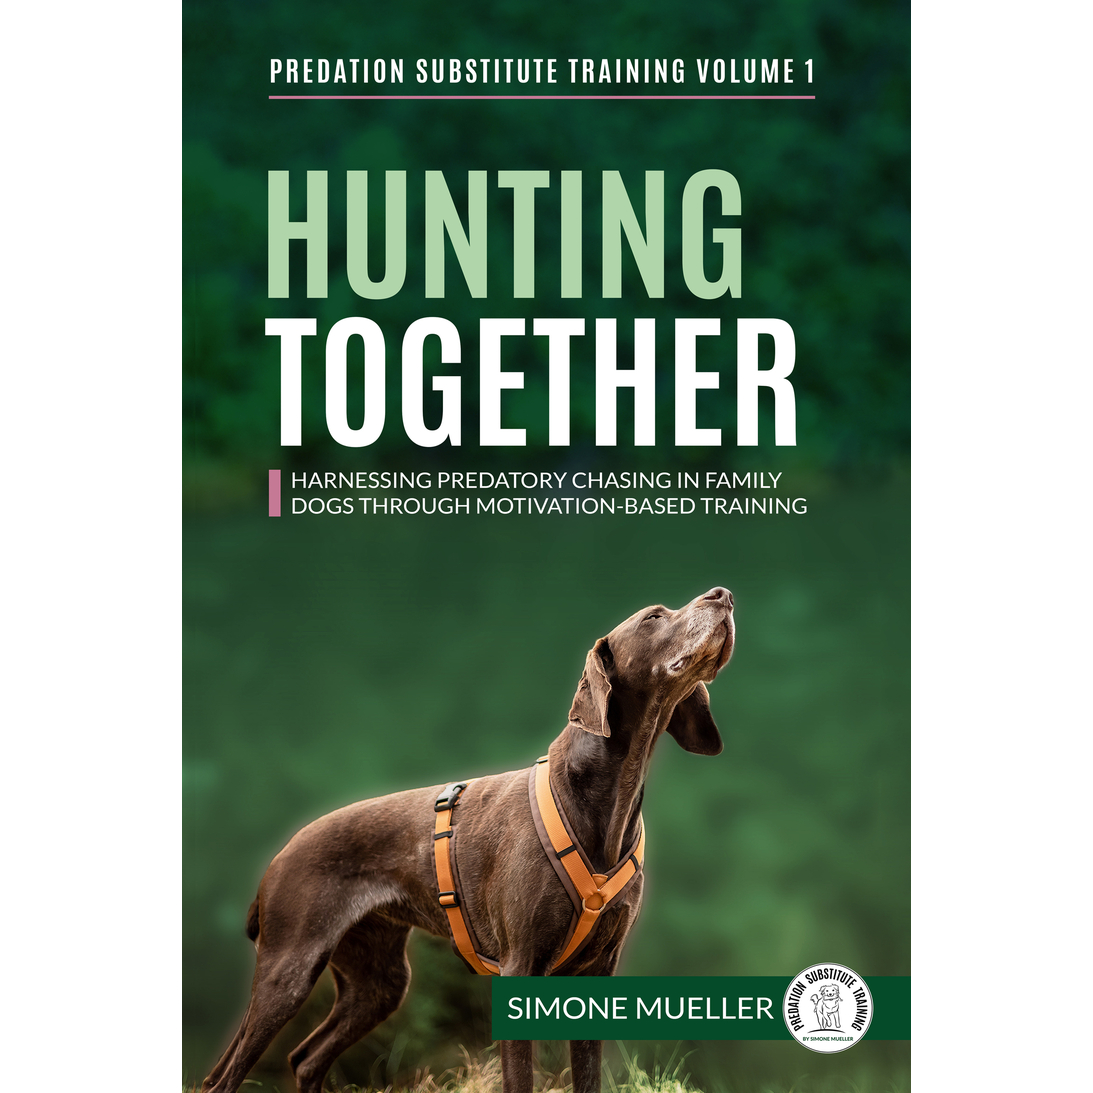 Hunting Together: Harnessing Predatory Chasing in Family Dogs through Motivation-Based Training (Predation Substitute Training) Paperback by Simone Mueller